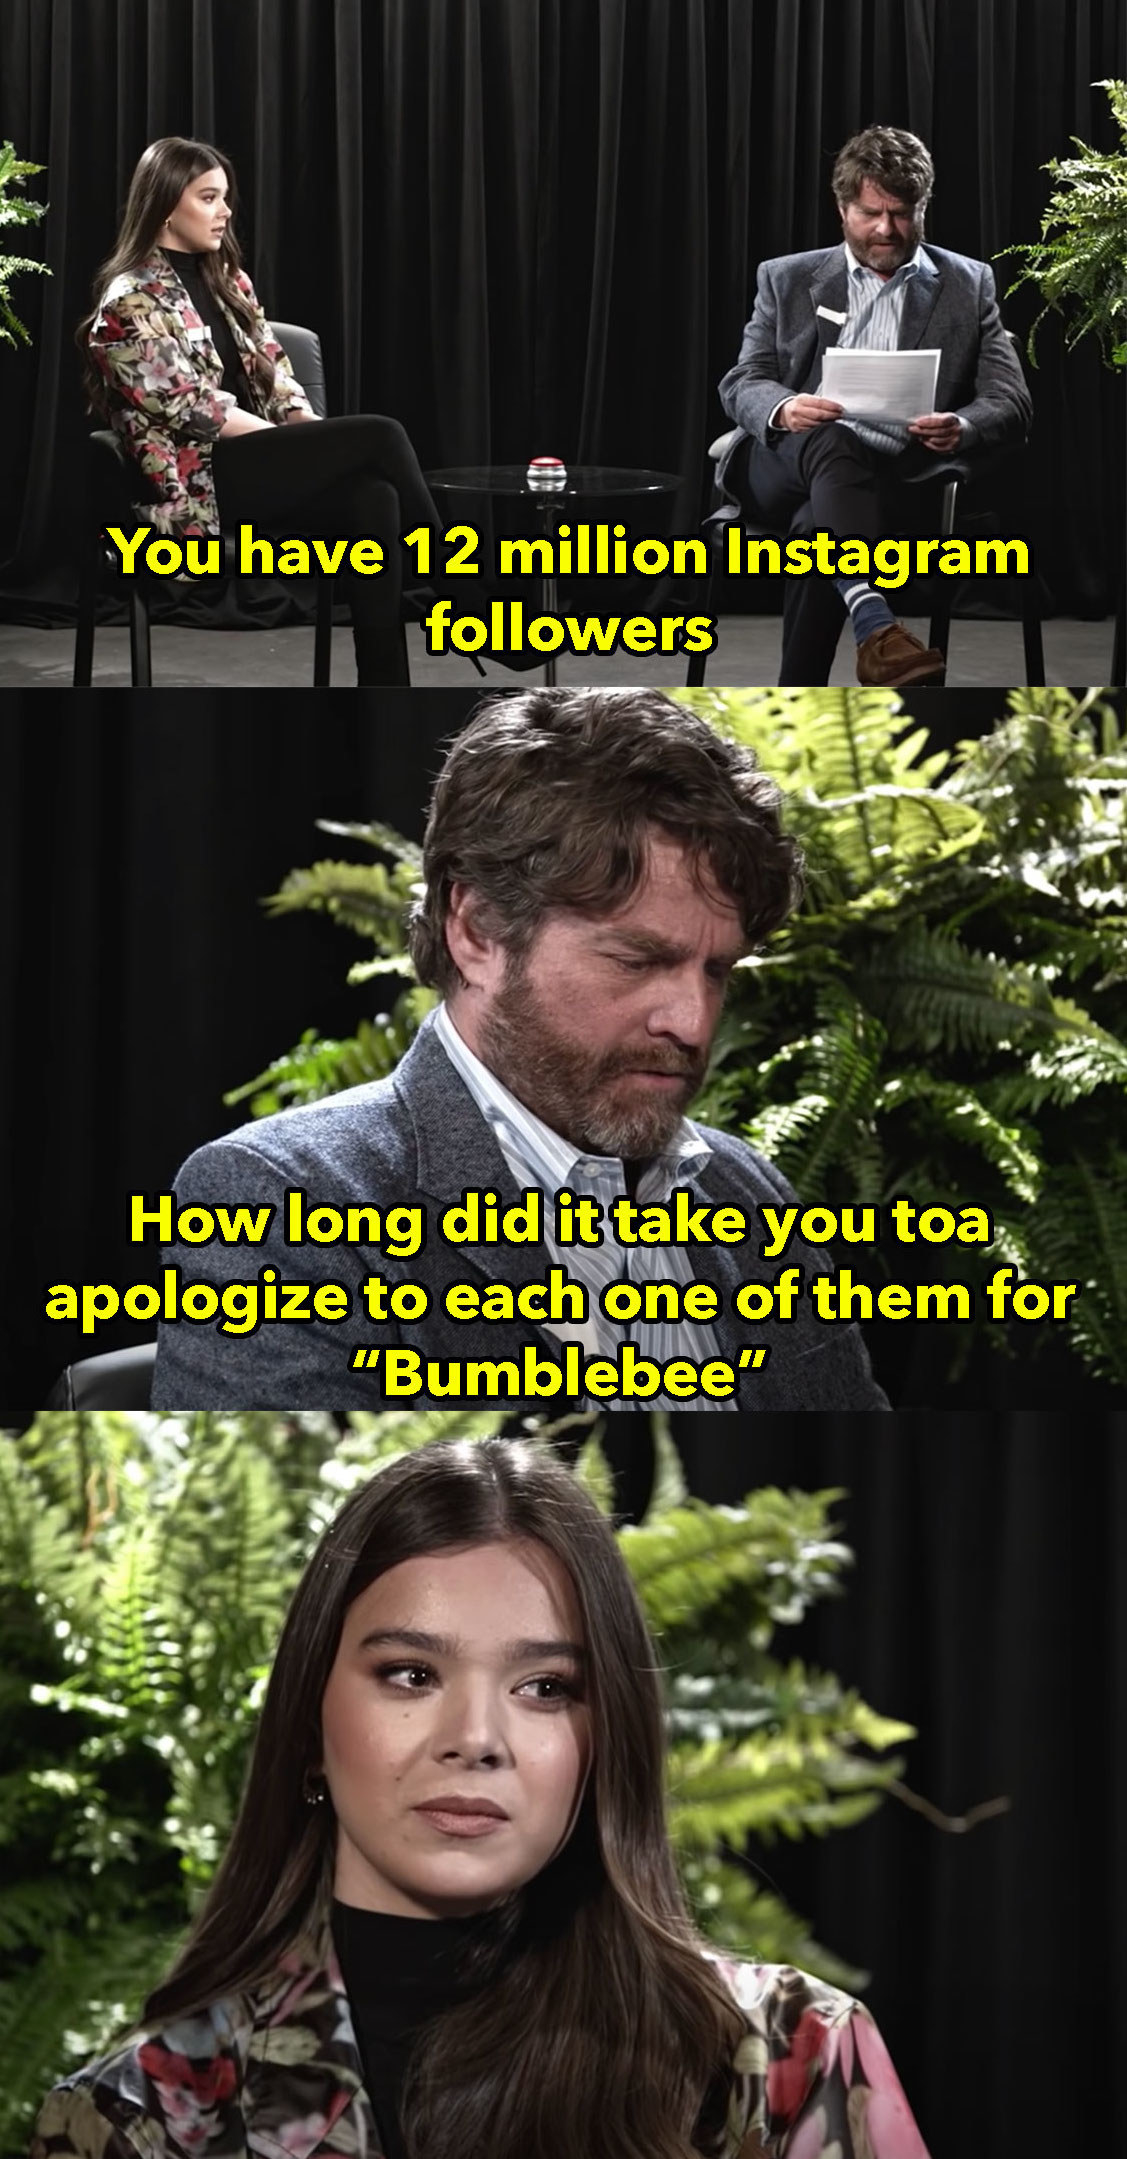 You have 12 million Instagram followers. How long did it take for you to apologize to each one of them for Bumblebee?